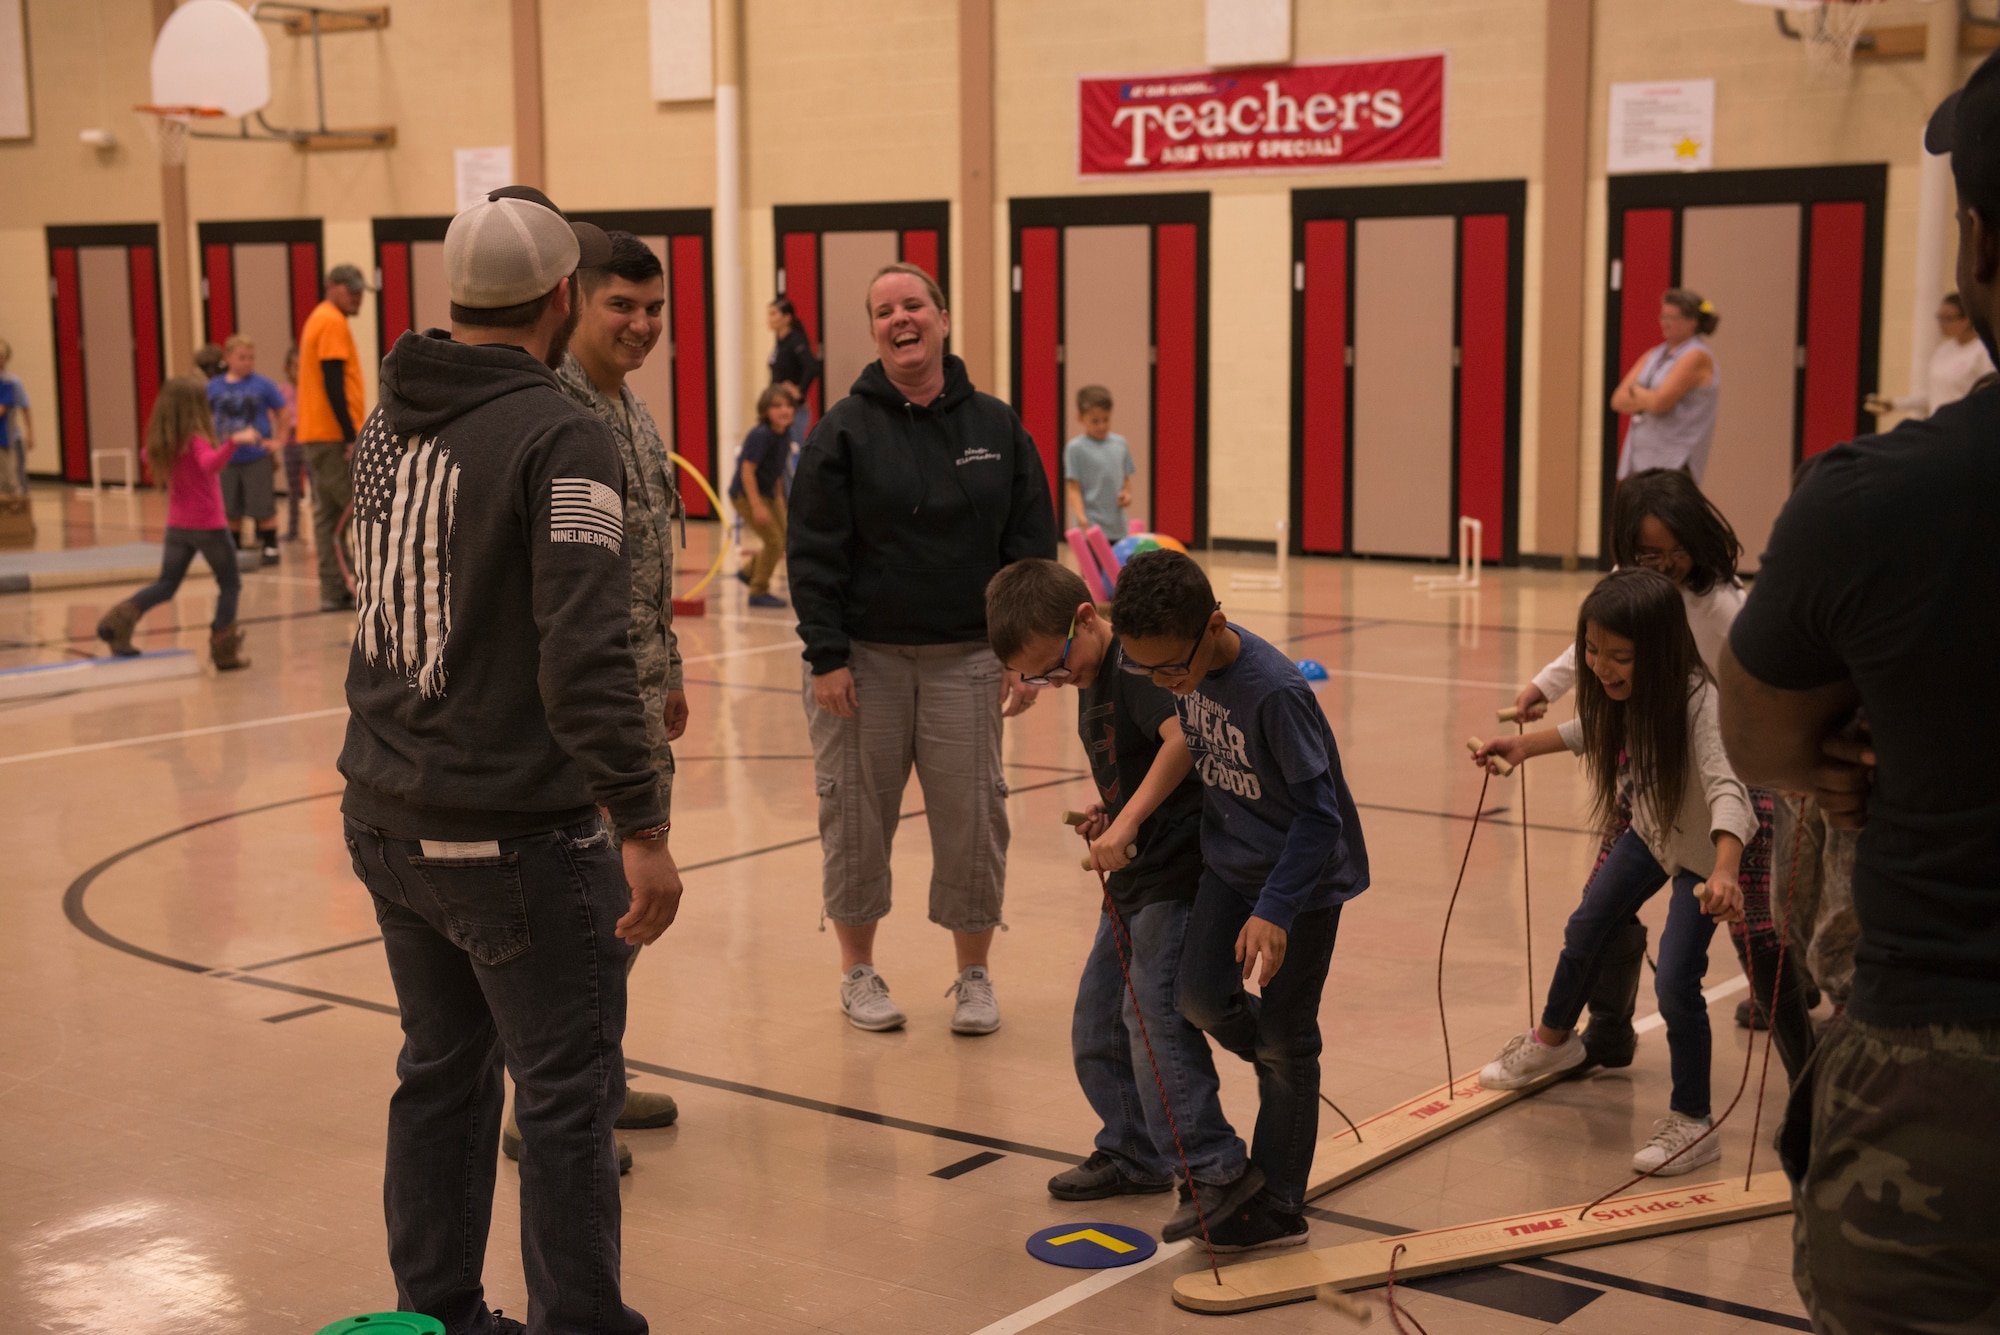 Airmen from the 366th Fighter Wing help students complete an obstacle course at North Elementary School, in Mountain Home, Idaho, October 4, 2018. North Elementary hosted their annual "Move-A-Thon" as a fundraiser for the students to go on field trips. (U.S. Air Force photo by Senior Airman Tyrell Hall)